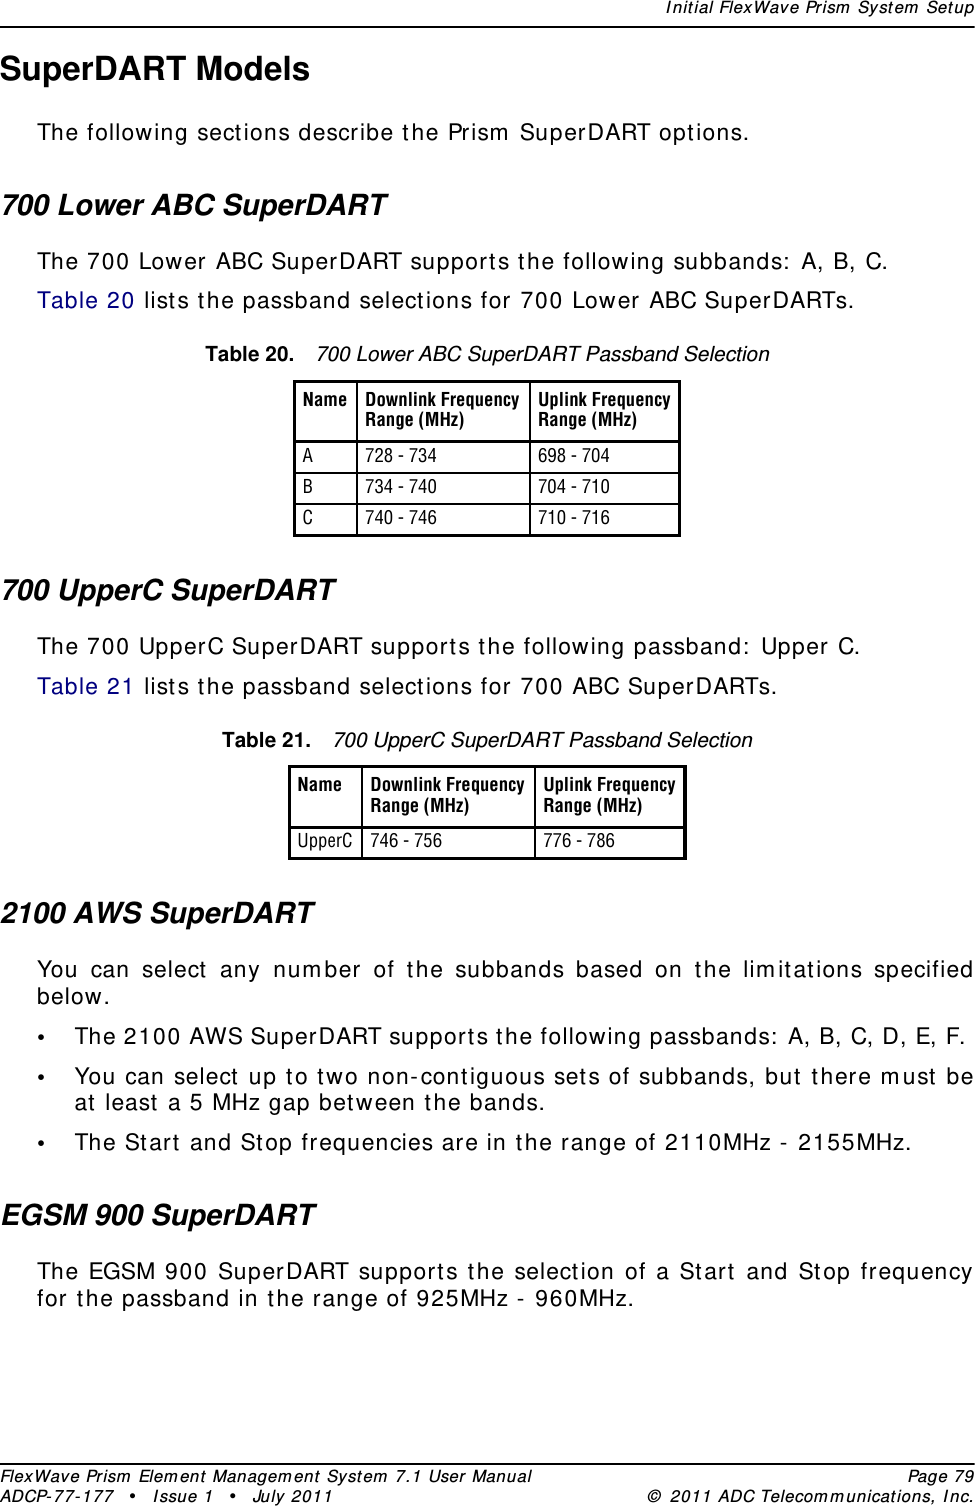 I nit ial FlexWave Prism  System  SetupFlexWave Prism  Elem ent  Managem ent Syst em  7.1 User Manual Page 79ADCP- 77- 1 77  • Issue 1 • July 2011 ©  2011 ADC Telecom m unicat ions, I nc.SuperDART ModelsThe following sect ions describe the Prism  SuperDART options.700 Lower ABC SuperDARTThe 700 Lower ABC SuperDART support s t he following subbands:  A, B, C.Table 20 lists t he passband select ions for 700 Lower ABC SuperDARTs.700 UpperC SuperDARTThe 700 UpperC SuperDART support s t he following passband:  Upper C.Table 21 list s t he passband selections for 700 ABC SuperDARTs.2100 AWS SuperDARTYou can select  any num ber of t he subbands based on the lim it ations specified below.•The 2100 AWS SuperDART support s t he following passbands:  A, B, C, D, E, F. •You can select up to two non-contiguous set s of subbands, but  there m ust  be at  least  a 5 MHz gap between the bands.•The St art  and St op frequencies are in t he range of 2110MHz -  2155MHz.EGSM 900 SuperDARTThe EGSM 900 SuperDART support s t he selection of a St art  and St op frequency for t he passband in the range of 925MHz - 960MHz.Table 20. 700 Lower ABC SuperDART Passband SelectionName Downlink FrequencyRange (MHz)Uplink FrequencyRange (MHz)A728 - 734 698 - 704B734 - 740 704 - 710C740 - 746 710 - 716Table 21. 700 UpperC SuperDART Passband SelectionName Downlink FrequencyRange (MHz)Uplink FrequencyRange (MHz)UpperC 746 - 756 776 - 786